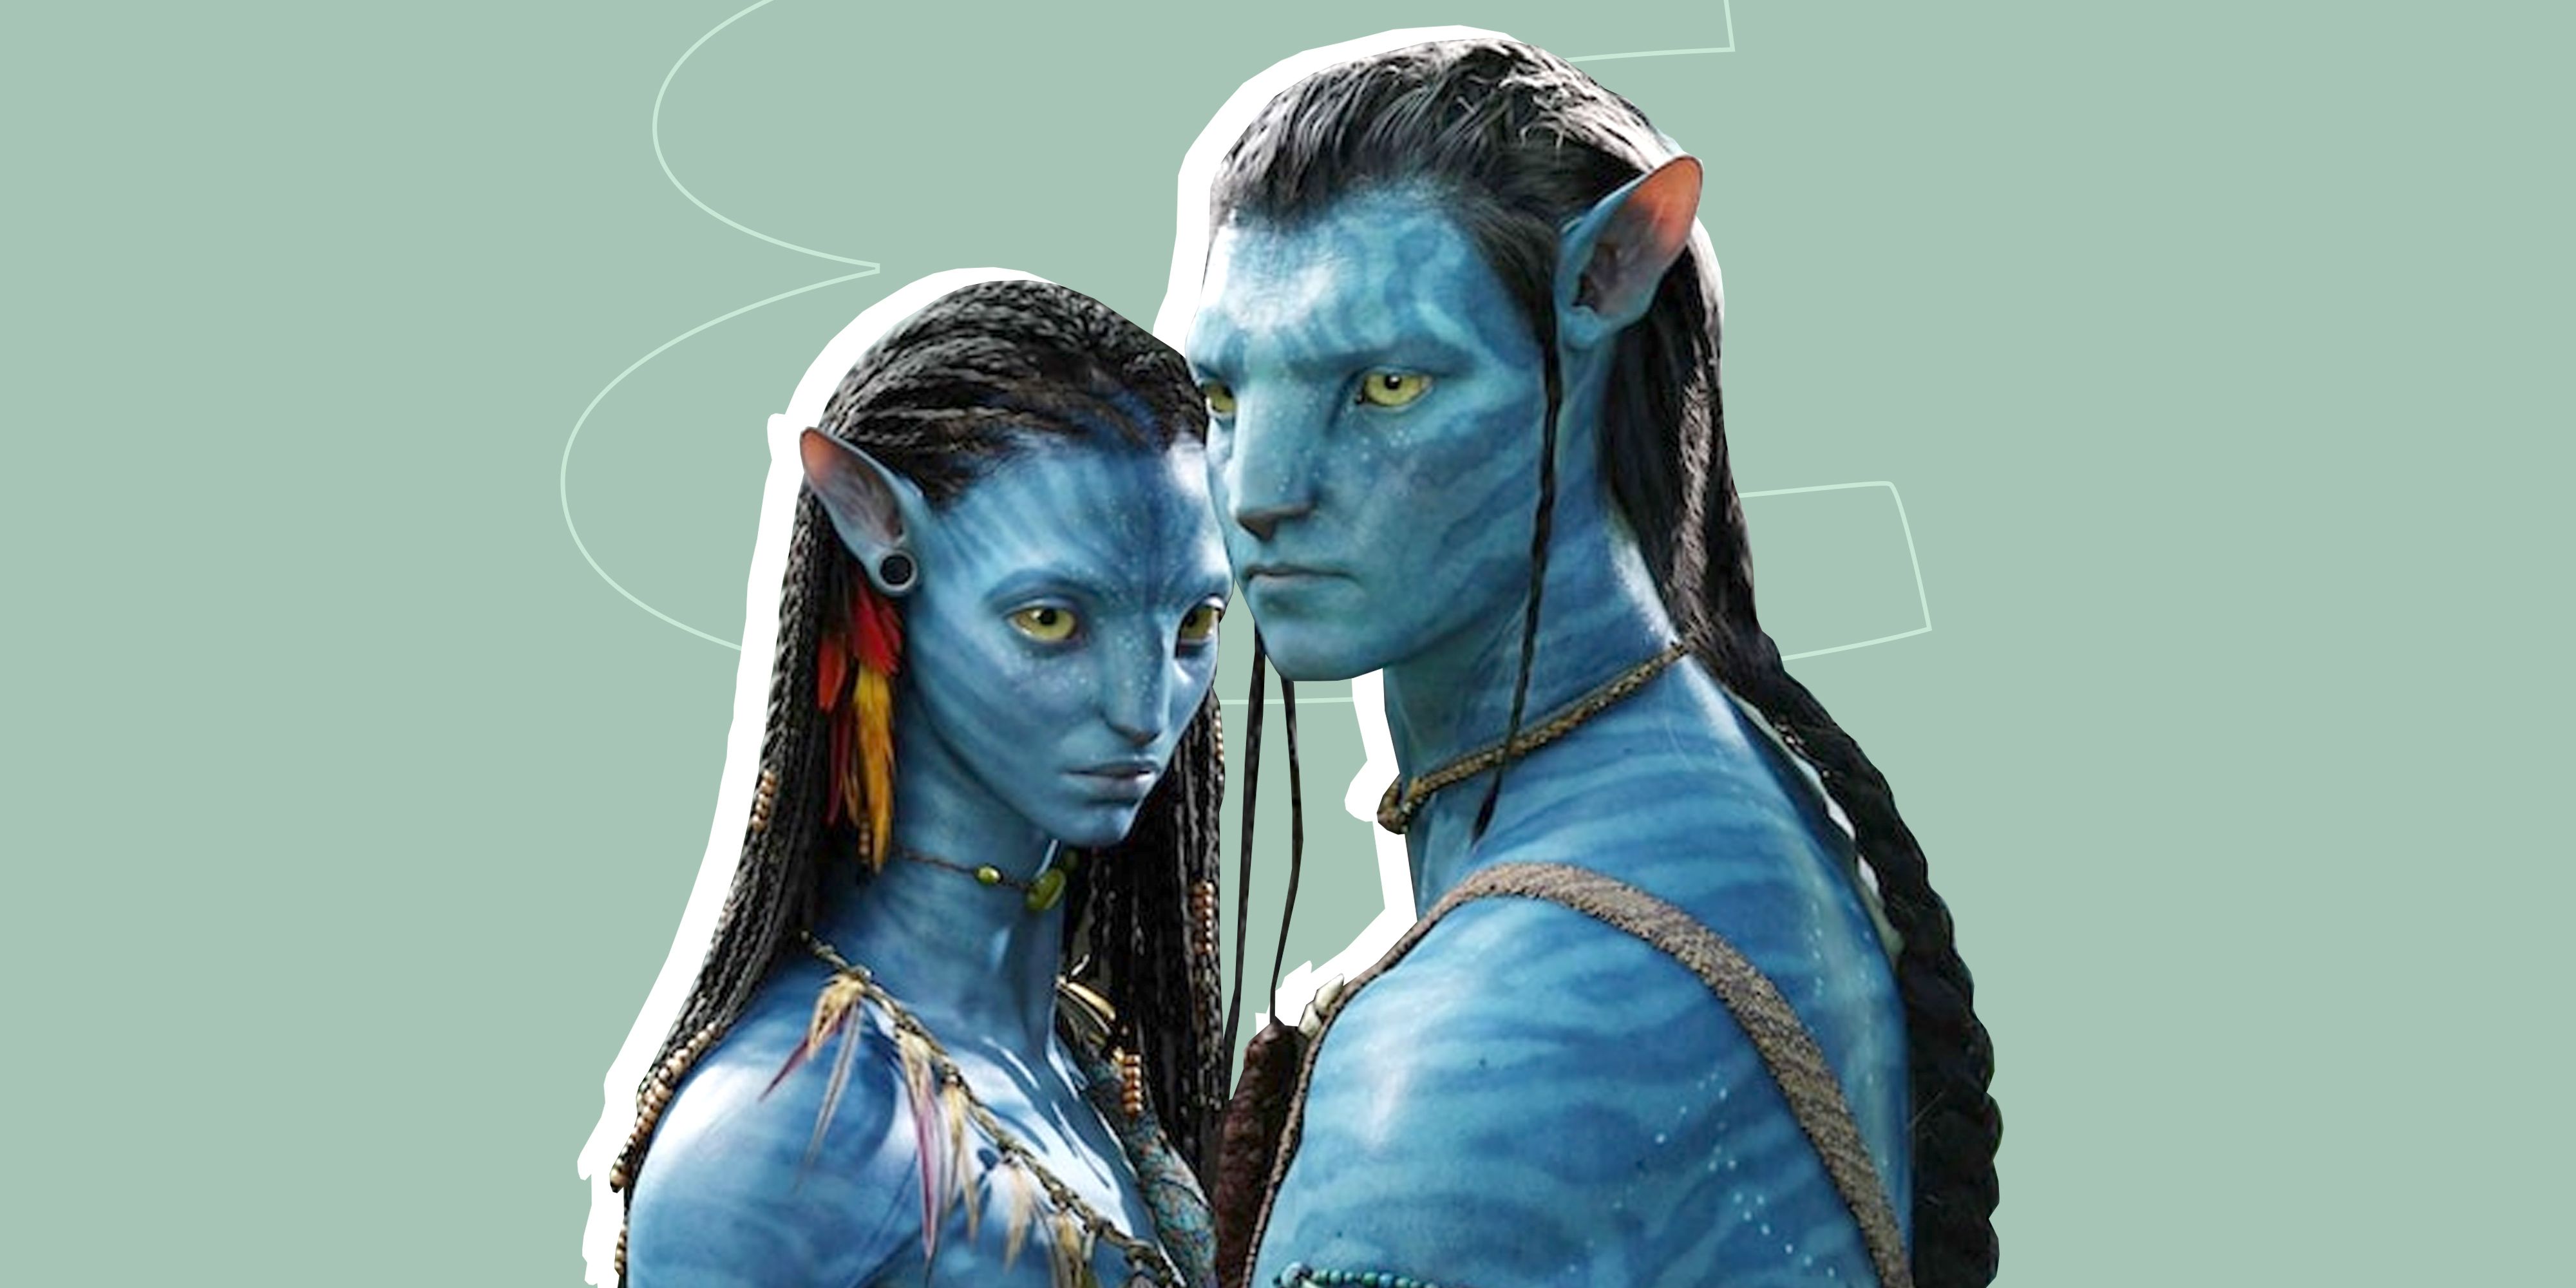 20 Epic Movies Like Avatar You Need To Watch Next